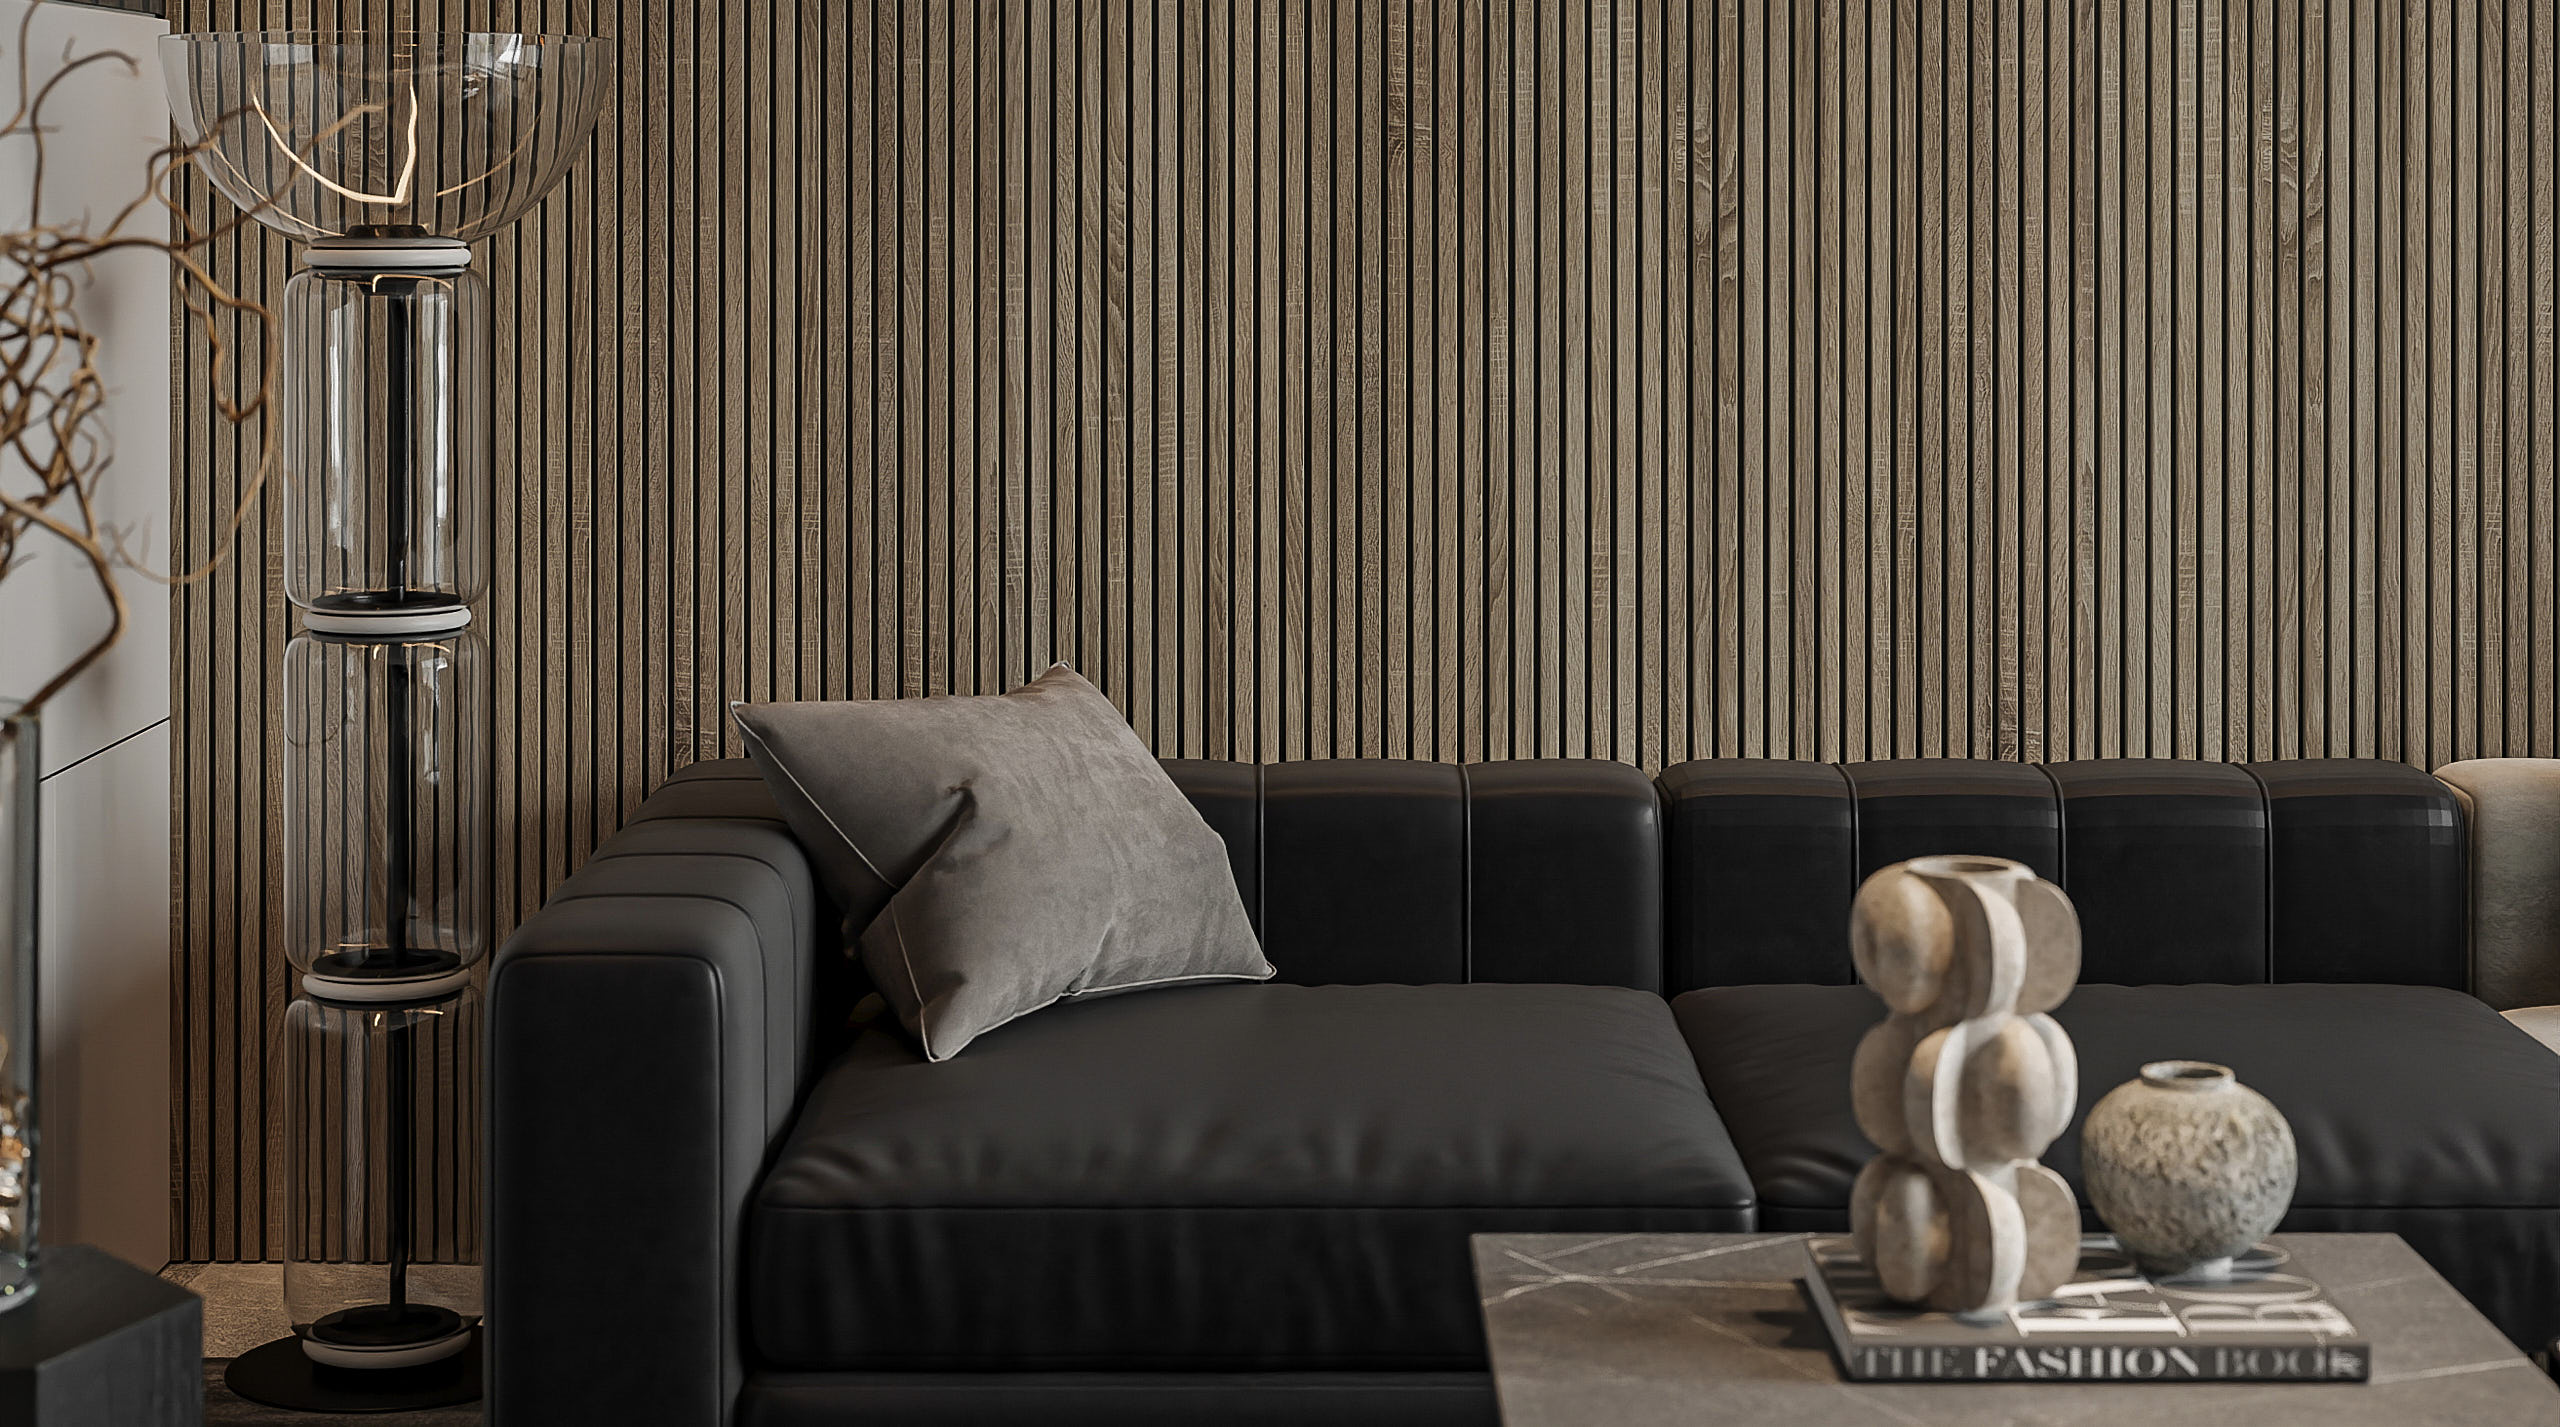 How to Install decorative acoustic panels for Soundproofing